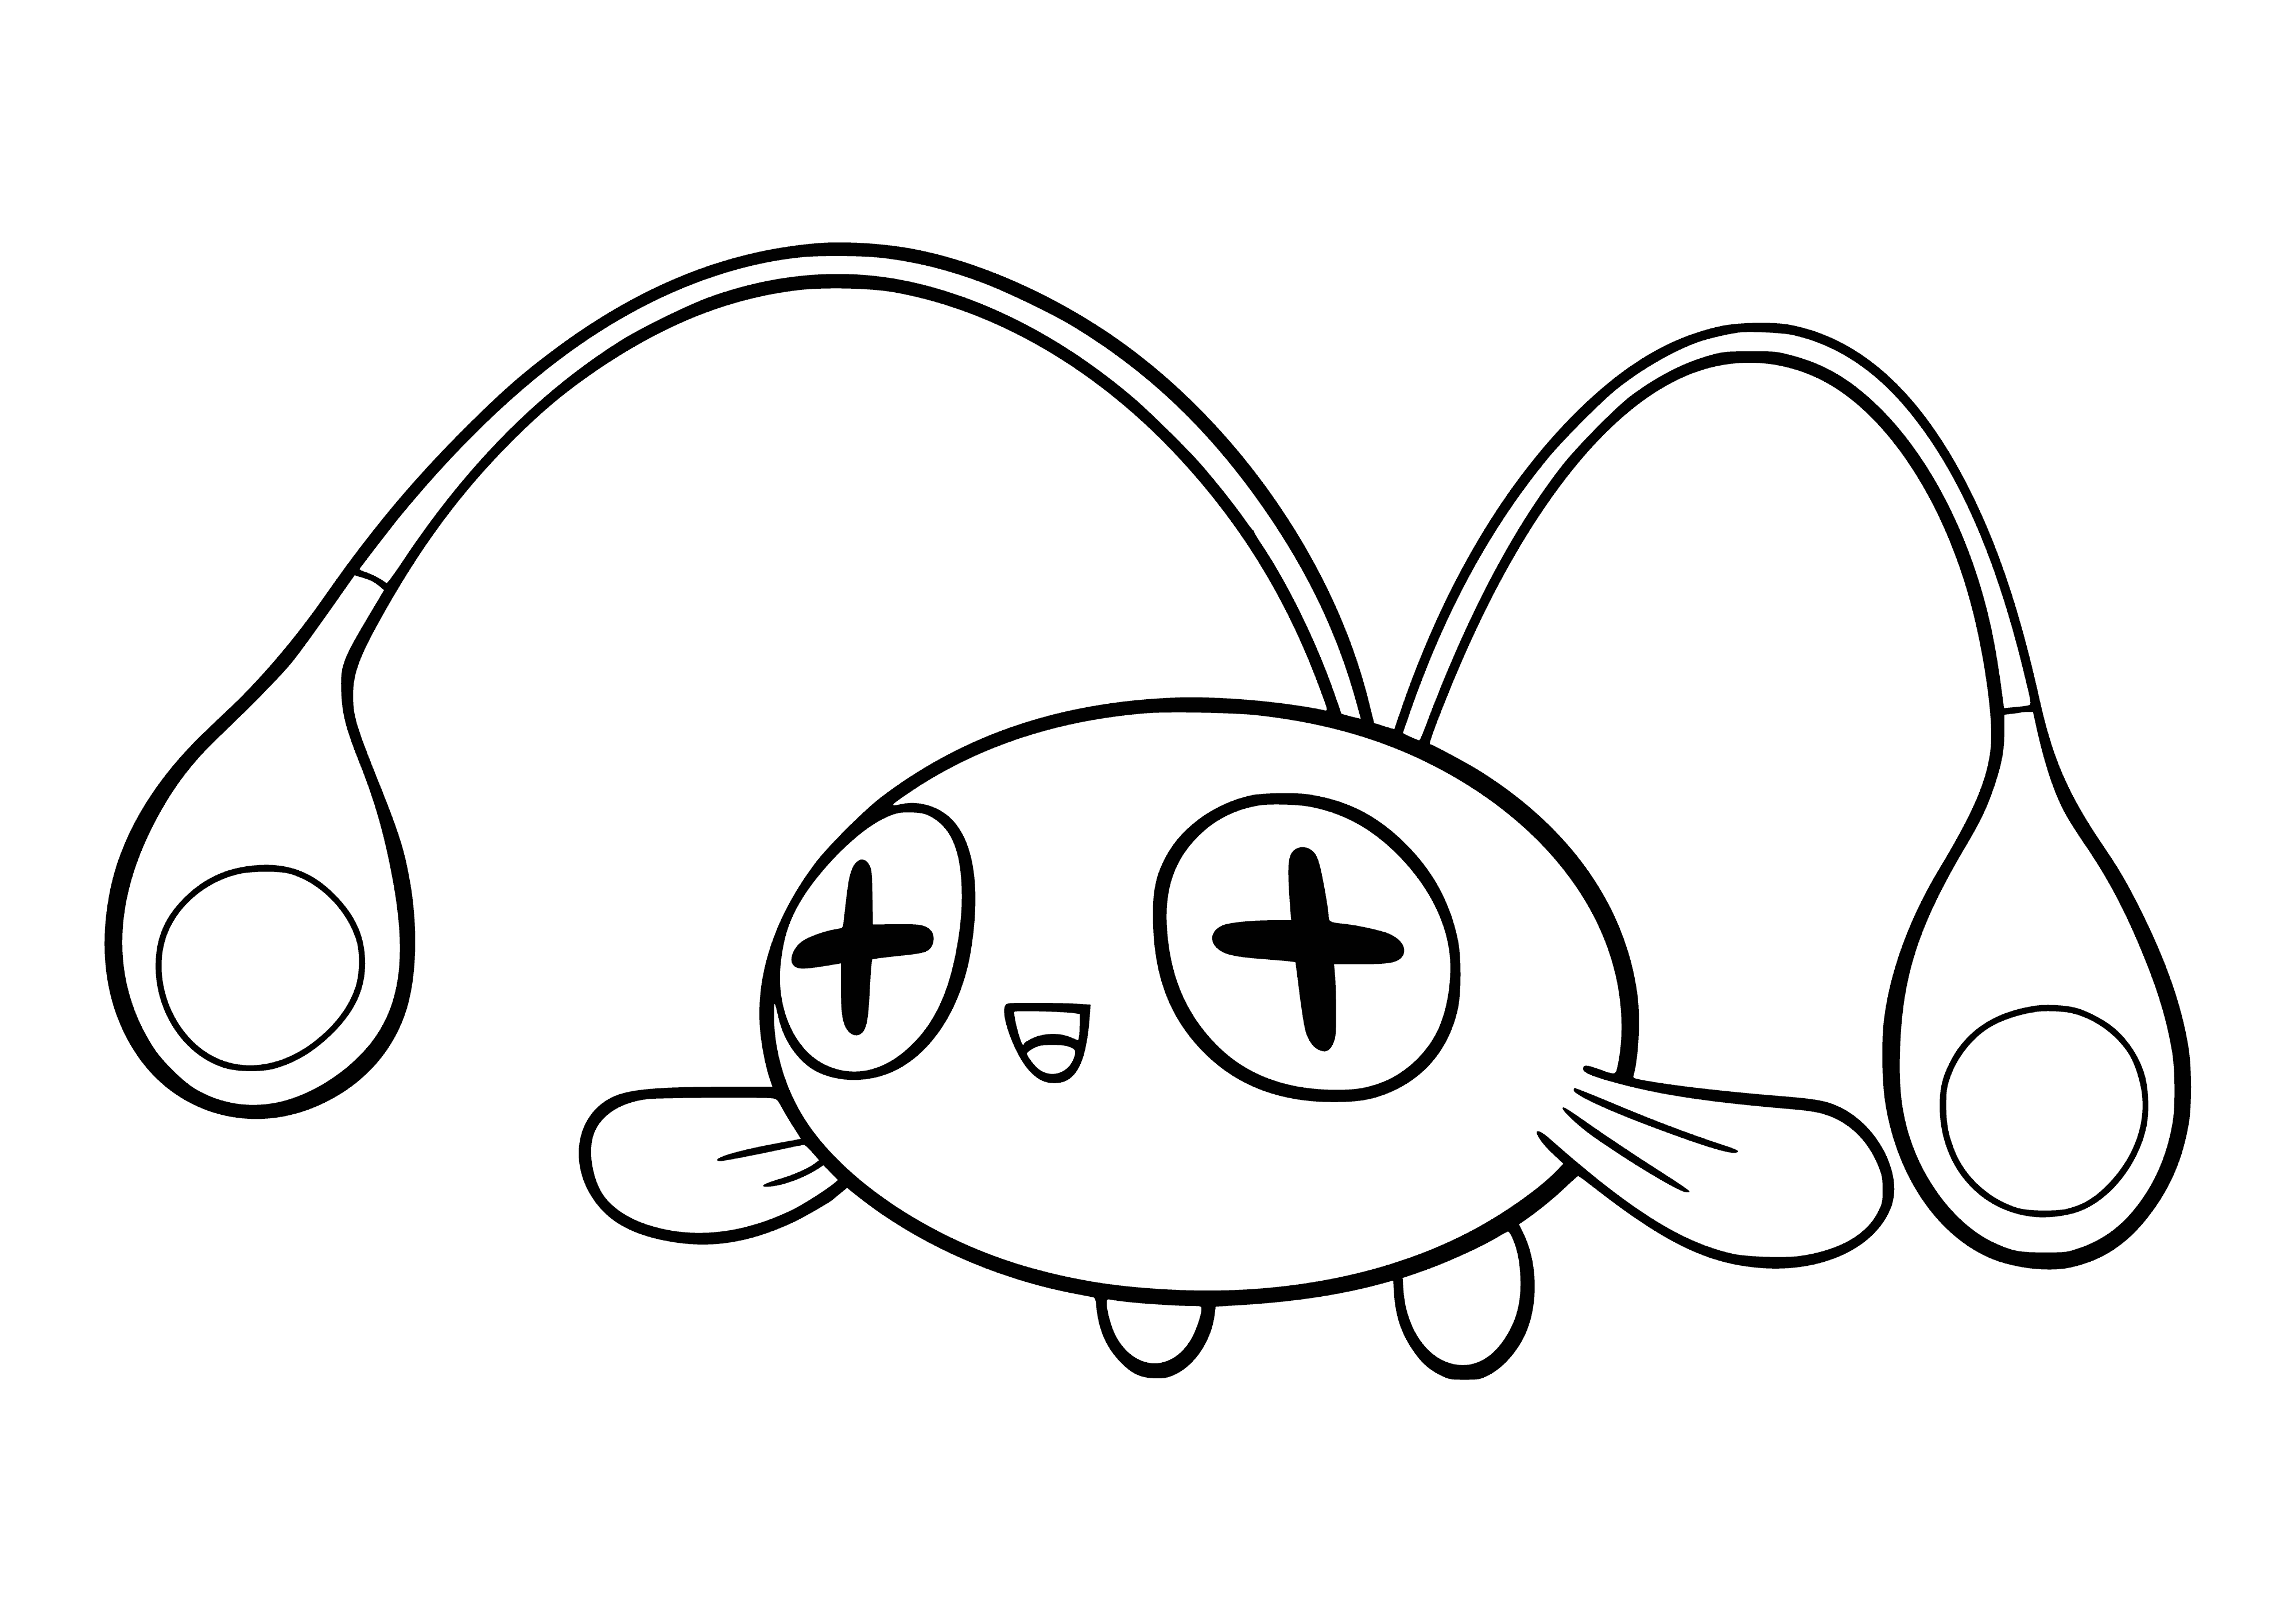 coloring page: Chinchou is a small, blue Pokémon with a black beak, red eyes, two fins, and a long tail.